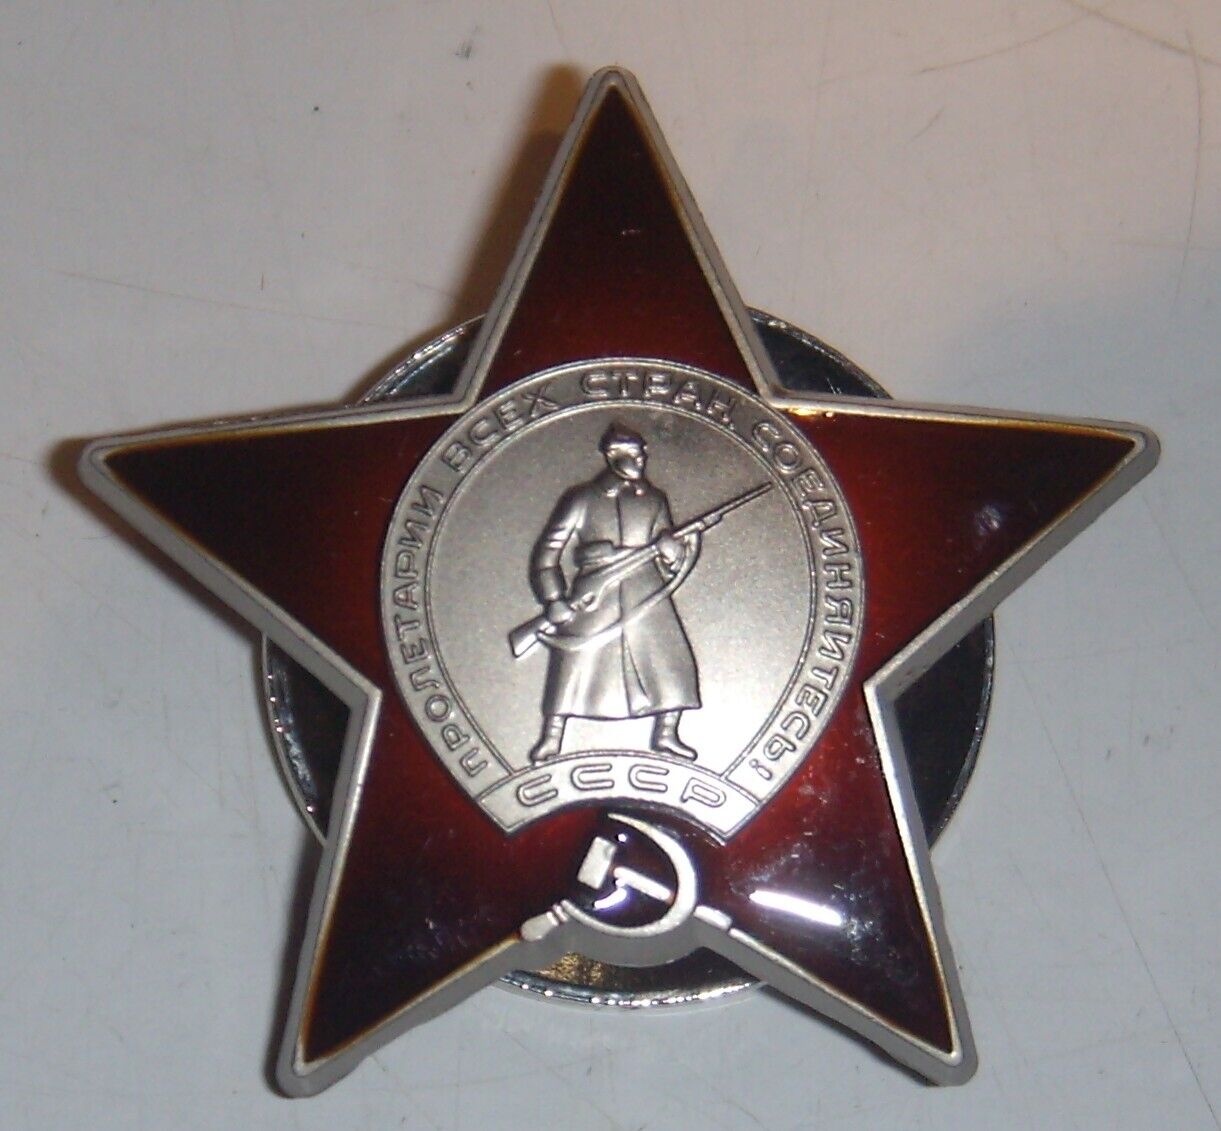 RUSSIAN ORDER OF THE RED STAR - REPLICA MEDAL OF WWII